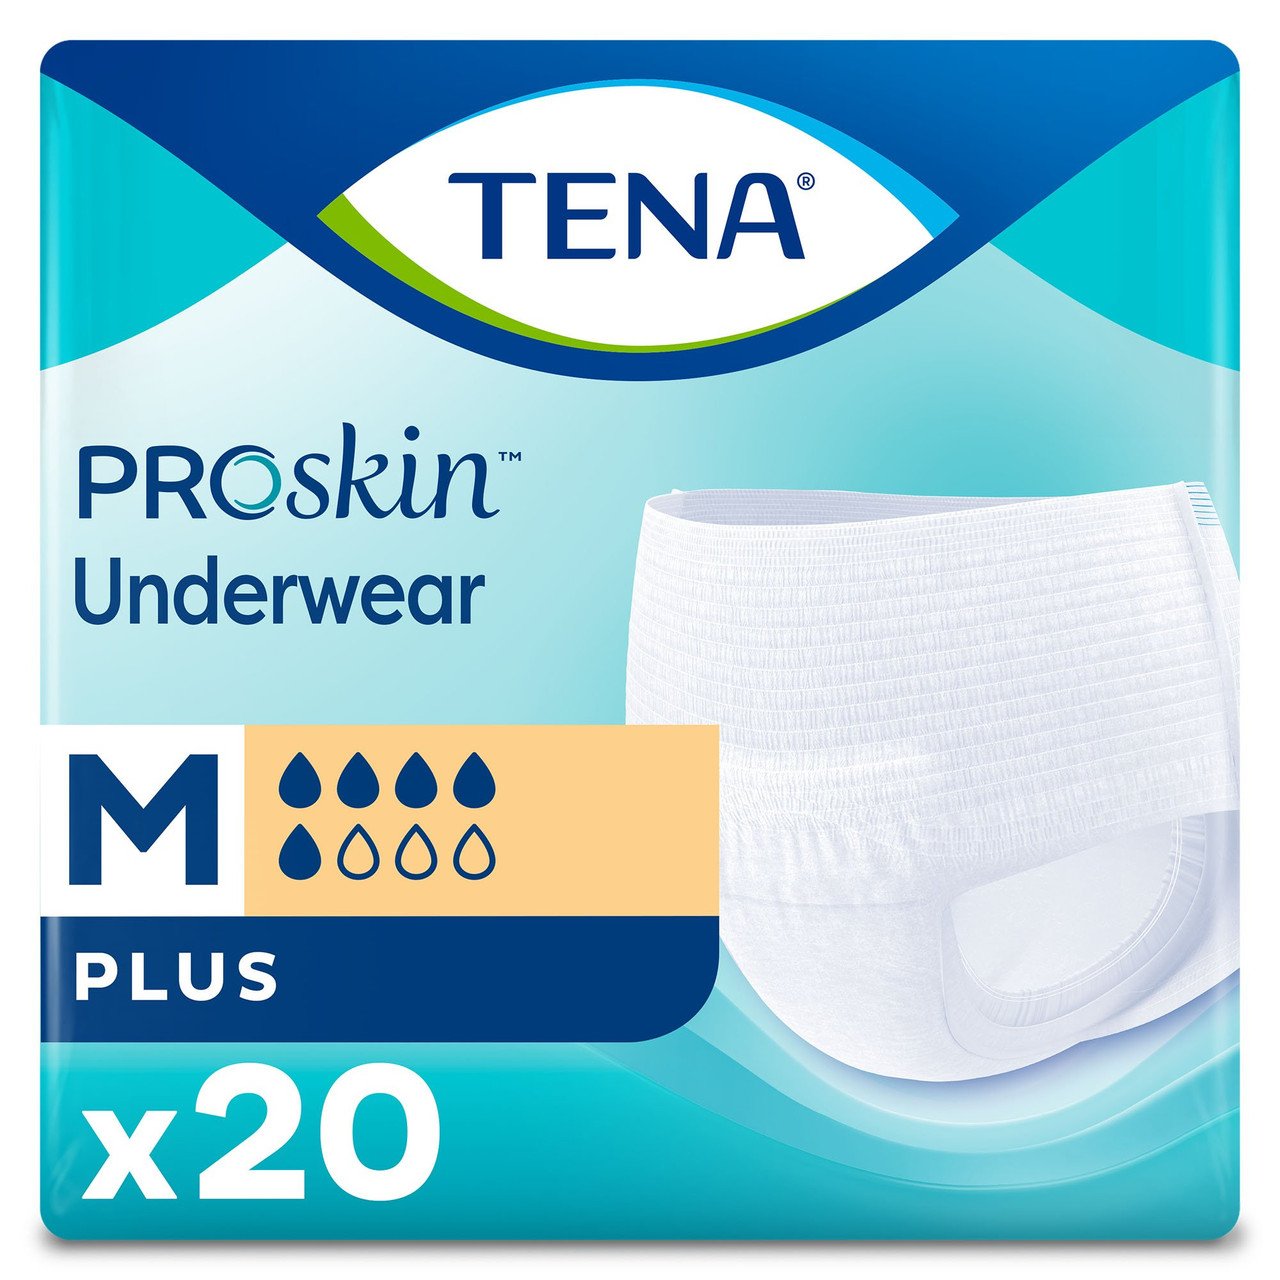 TENA ProSkin Incontinence Underwear for Adults, Plus Absorbency, Breathable  - Unisex, Size Medium